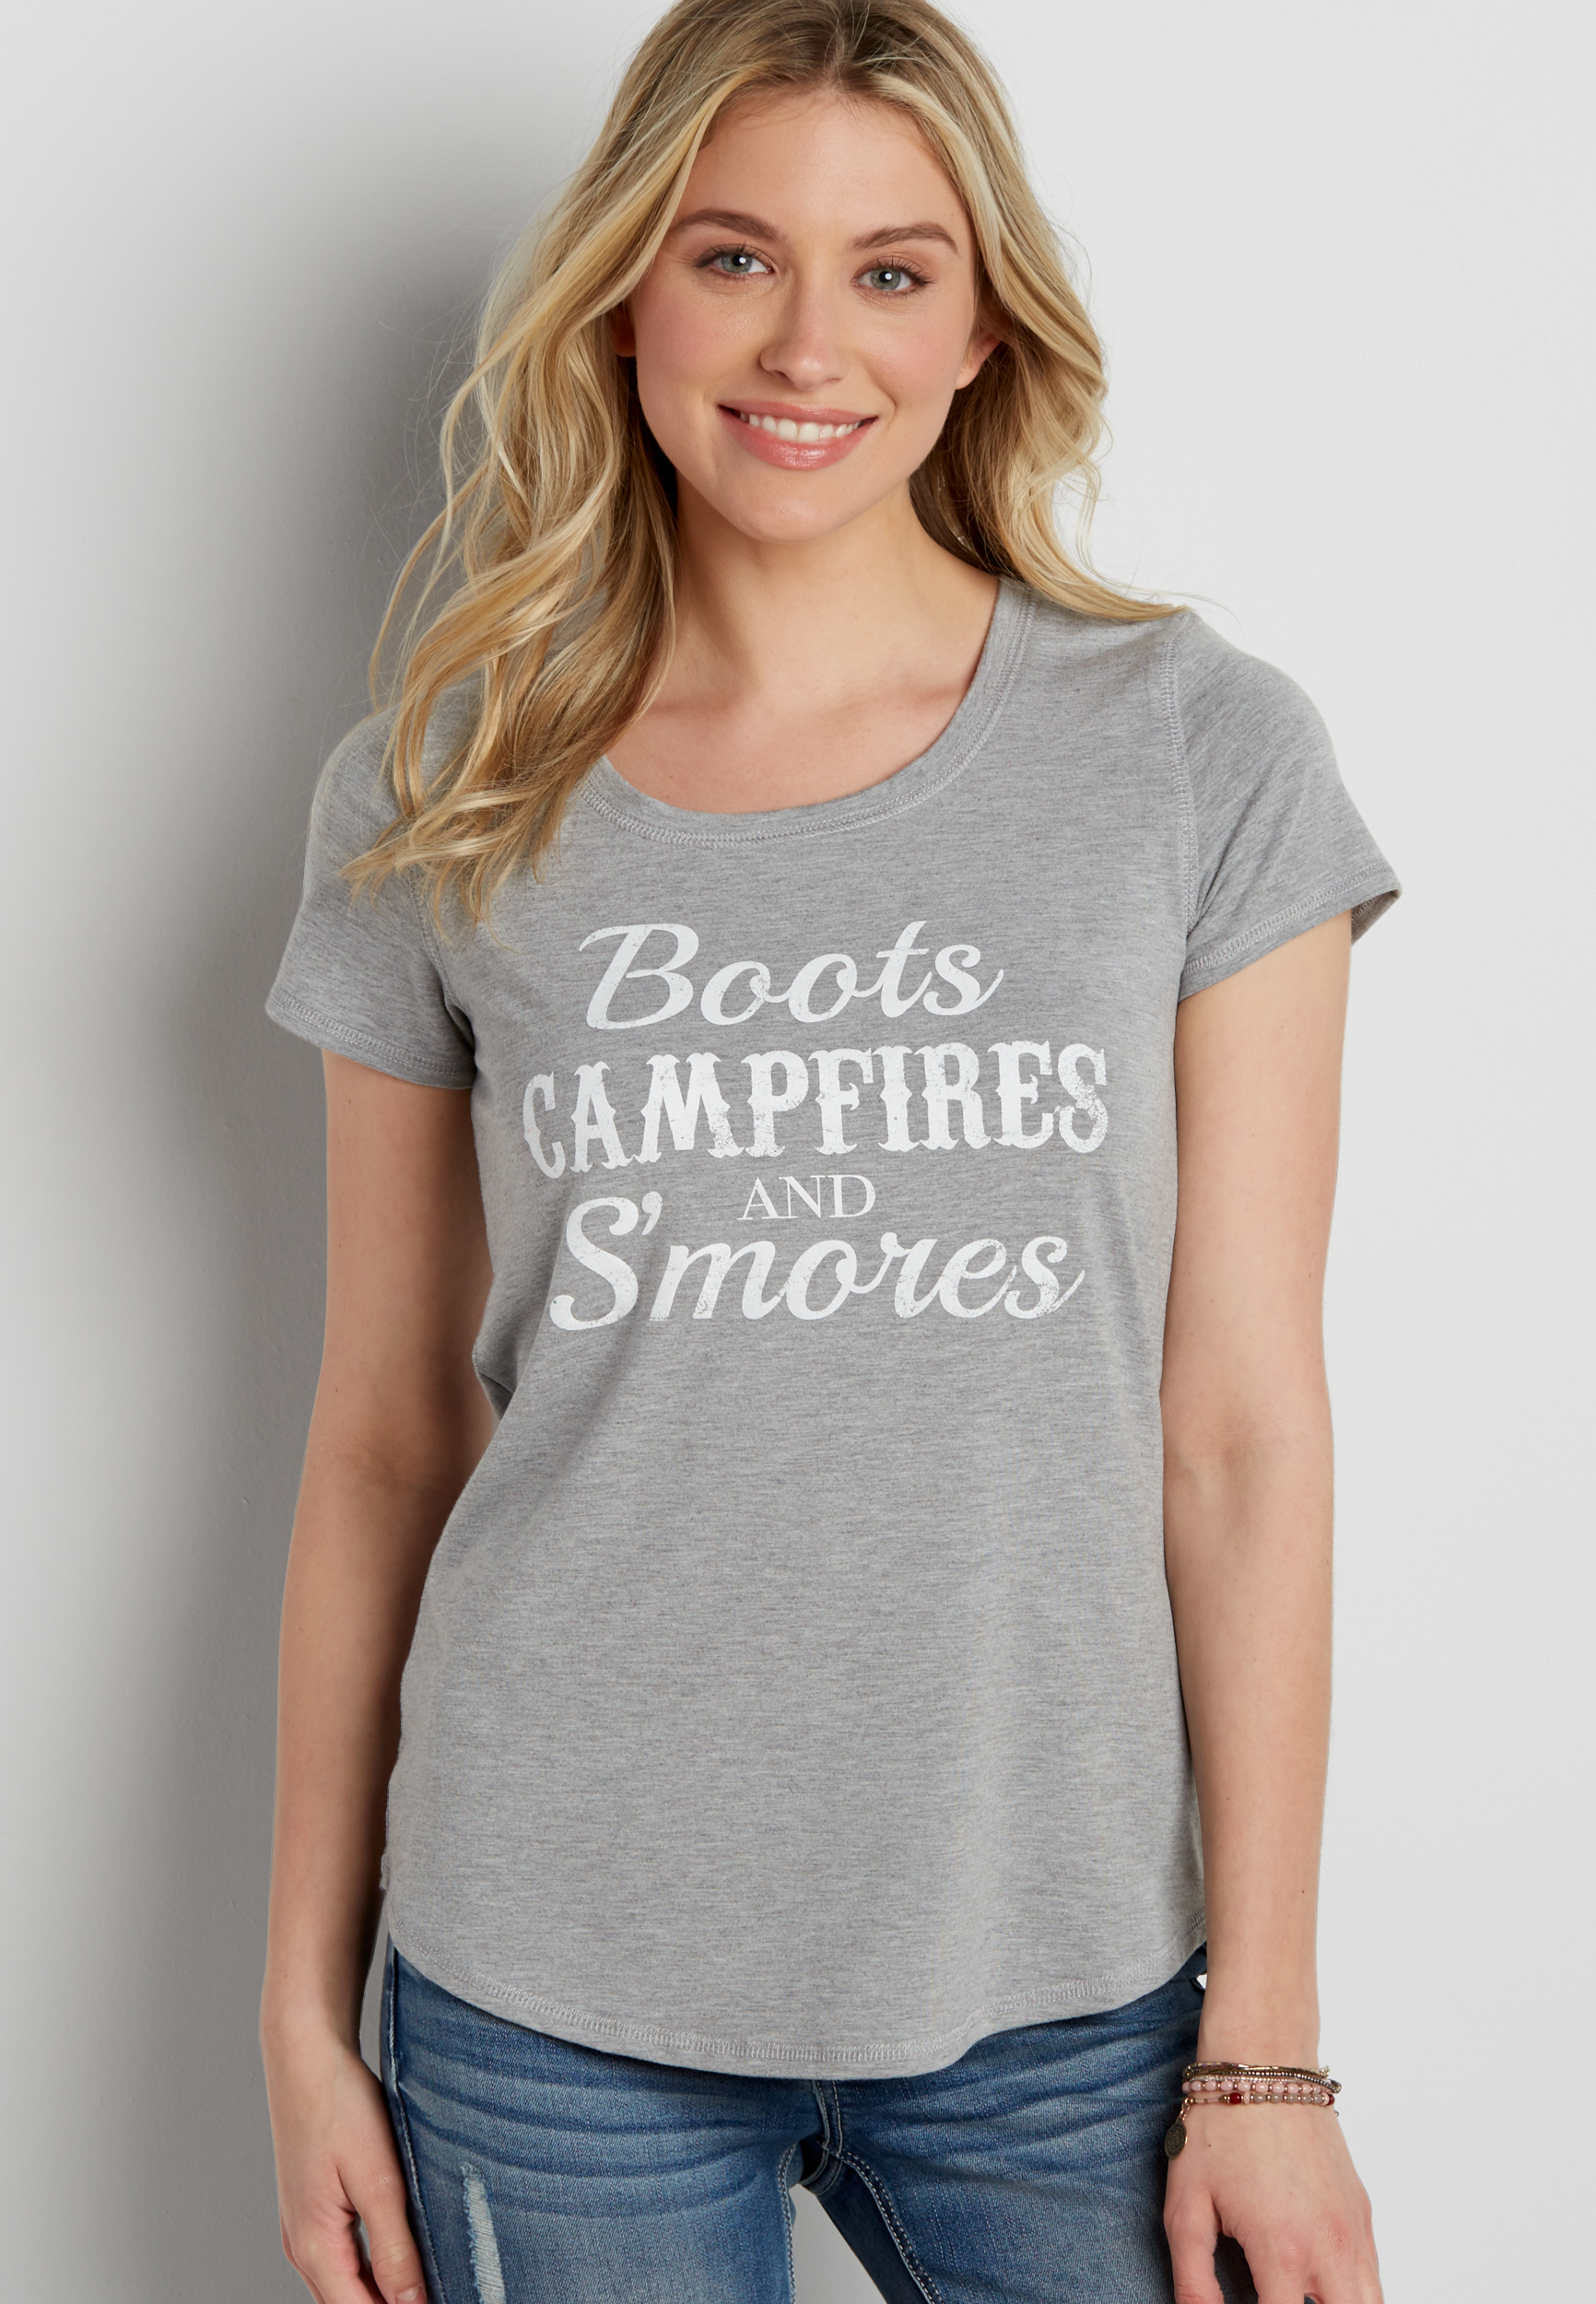 heathered tee with boots, campfires, and s'mores graphic | maurices